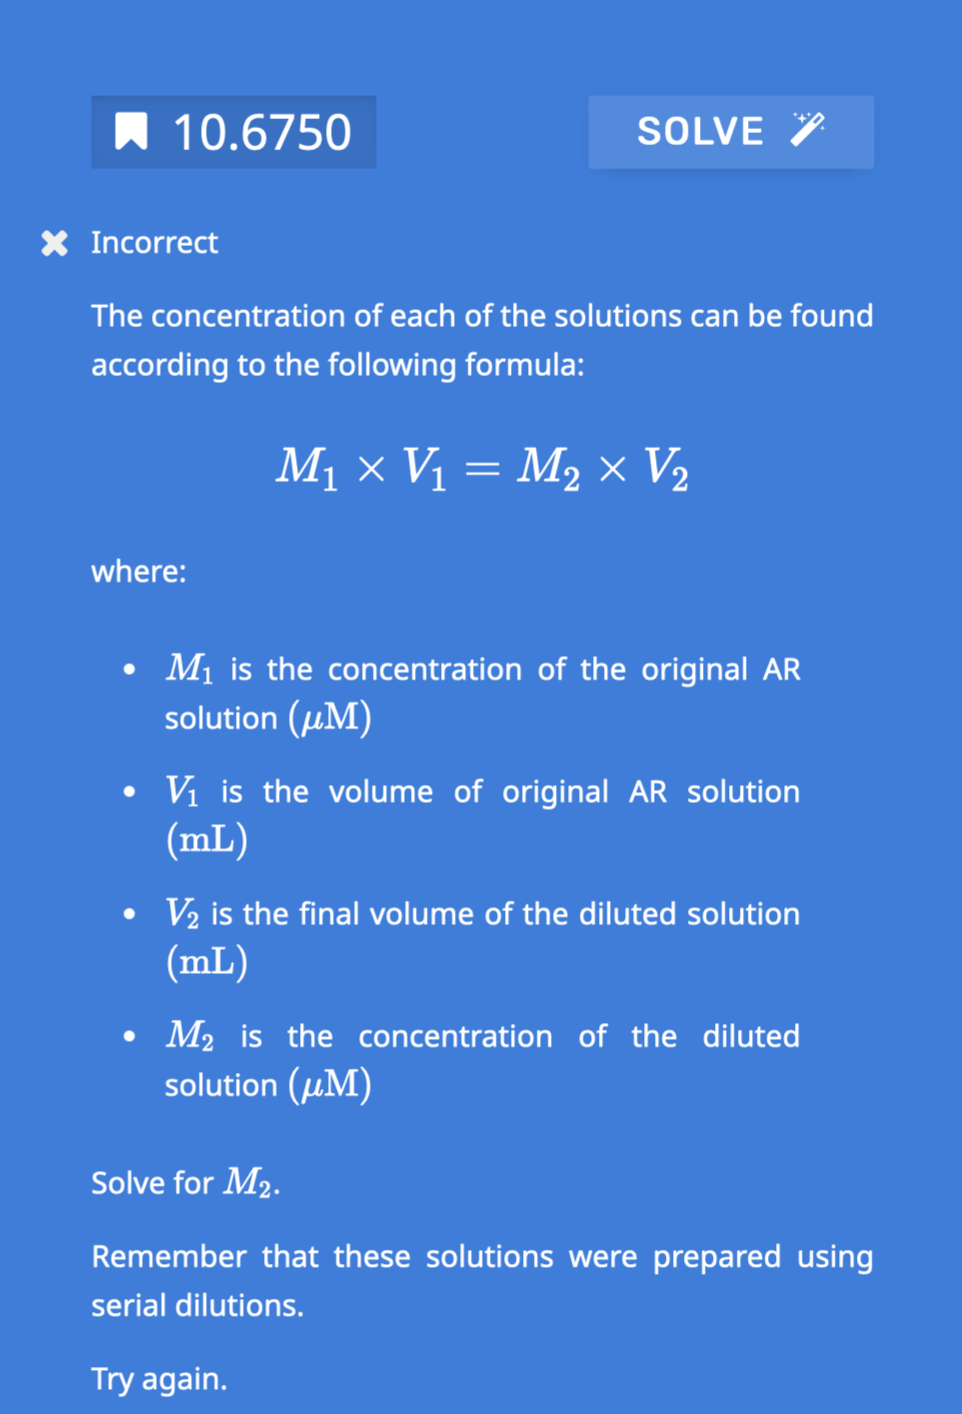 10.6750
X Incorrect
SOLVE
The concentration of each of the solutions can be found
according to the following formula:
M₁ × V₁ = M₂ × V₂
where:
• M₁ is the concentration of the original AR
solution (μM)
V₁ is the volume of original AR solution
(mL)
V₂ is the final volume of the diluted solution
(mL)
• M₂ is the concentration of the diluted
solution (M)
Solve for M₂.
Remember that these solutions were prepared using
serial dilutions.
Try again.